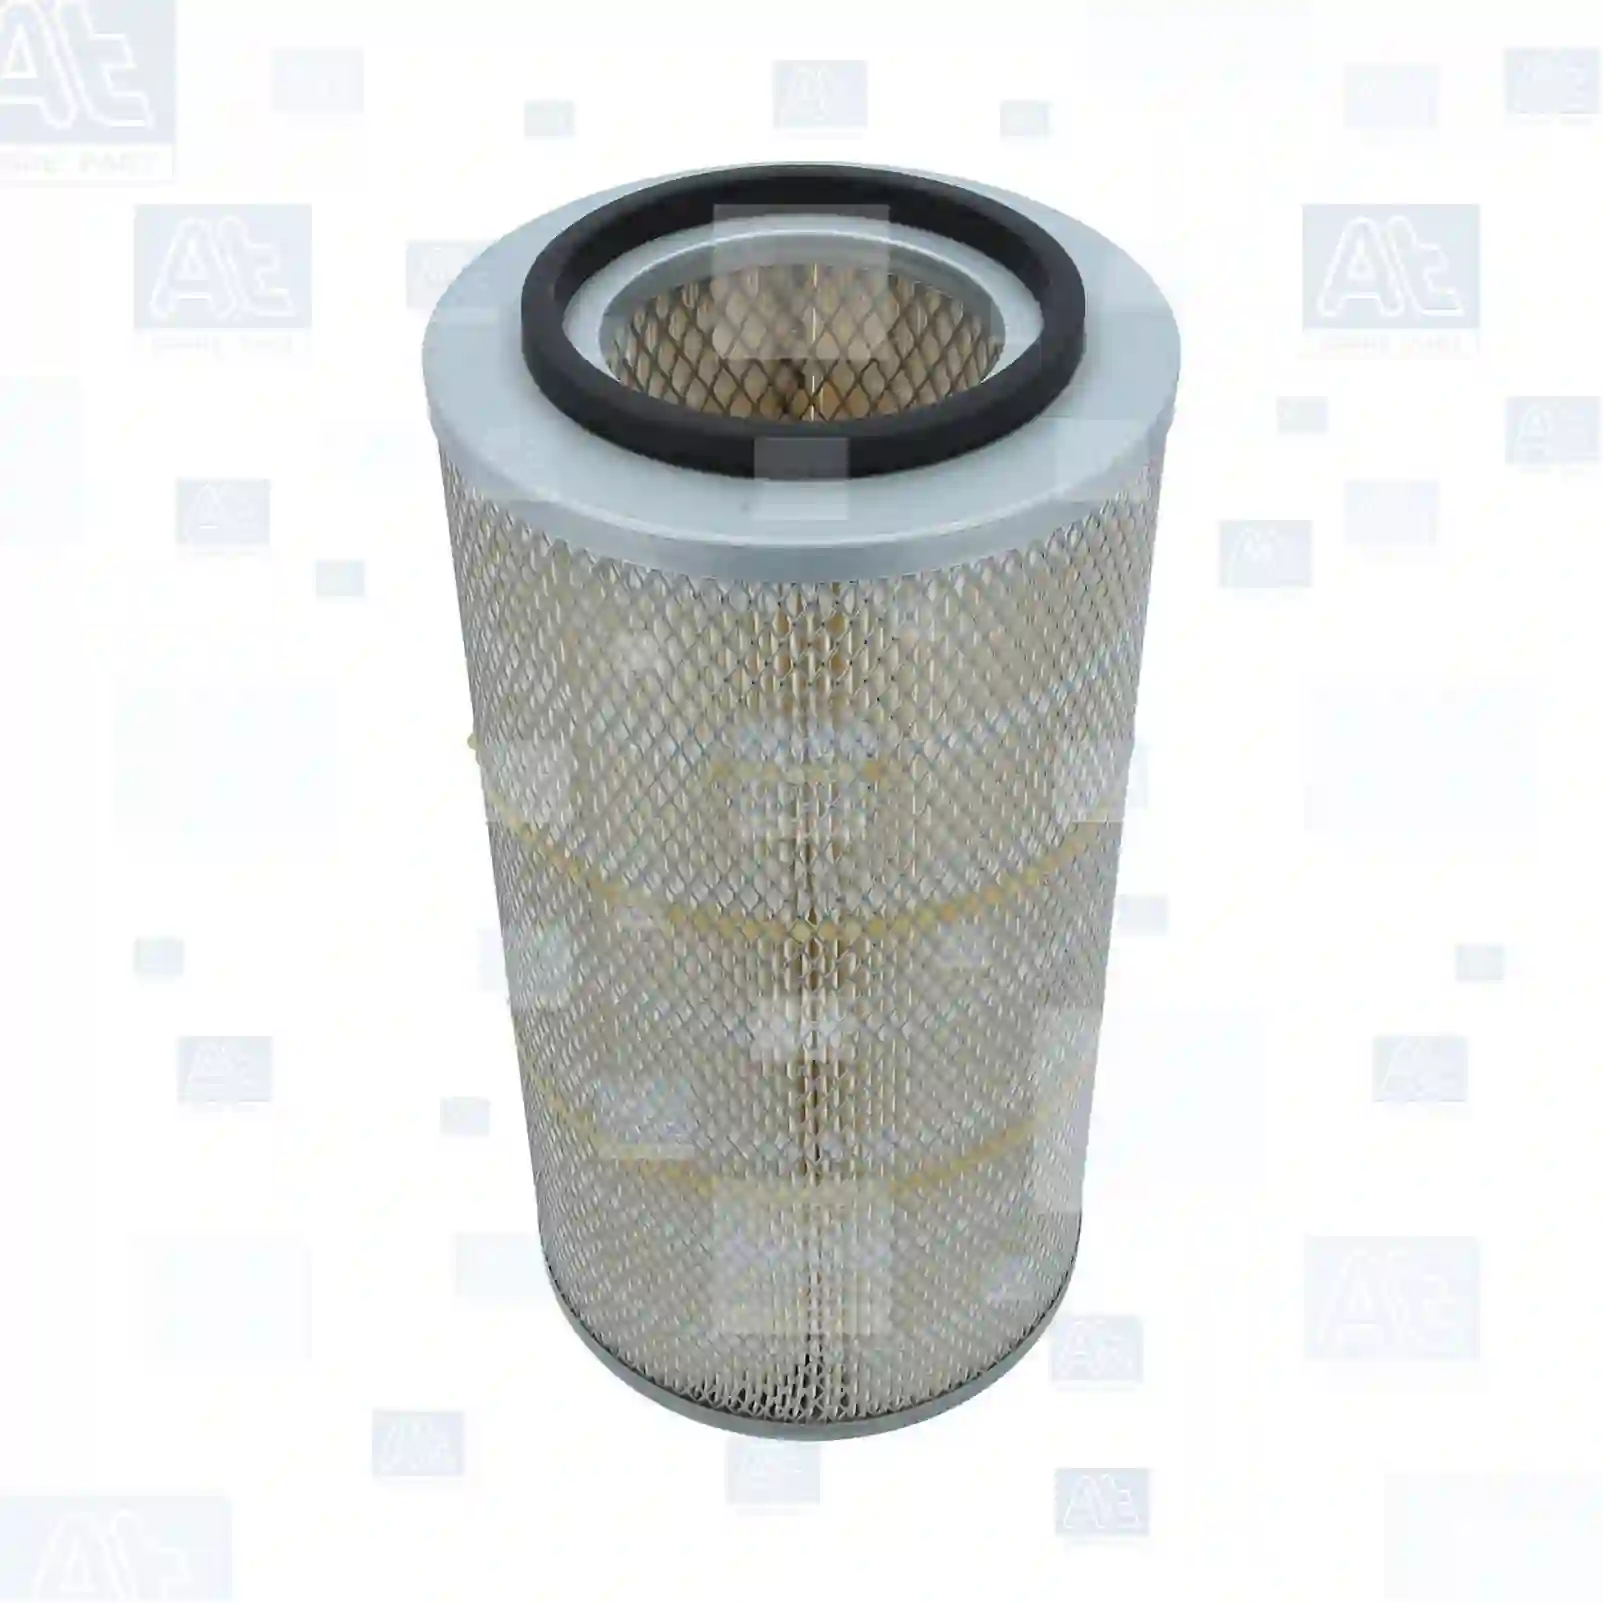  Air Filter Air filter, at no: 77706038 ,  oem no:8009101116005, 162000190701, 3219420R1, 3219420R91, 3226416R1, 326416R1, 402219502, 87704243, E155526, 3I-0337, 10944204, 10945204, 130941802, 20940004, 0000677400, 0006774340, 0006774341, 153174, 3353440, 0265045, 0289829, 1500299, 265045, 288756, 289829, 396075, ABU8525, 00405174, 29504376, 43262500, 43264500, 988585, 98858500, 00019922, 01186046, 01902077, 02165049, 03018372, 1210702019500, 12153221, 13002B1810, 605412970034, 606901670116, 8009101116005, 190537, 645372, 1210702019500, 0746369, 1470629, 4134366, F184230090050, 01186046, 01902077, 02165049, 04776902, 07124343, 07140539, 08321421, 08323326, 08323337, 08323338, 08323339, 08323340, 09987150, 40278720, 42078290, 75247062, Y03720711, Y05776111, 5011321, 5011552, DNP771561, 265045, 9307846, 94613436, 9974139, 25041936, 25041956, 25041957, 9974139, 3219420R1, 3226416R1, 1-3002B181-0, 00190537, 00645372, 00691351, 01186046, 01902077, 02165049, 04207829, 04776902, 08323326, 08323337, 08323338, 08323339, 08323340, 09987150, 1902077, 2165049, 42078290, 8323326, 8323337, 8323338, 8323339, 8323340, 41AJ58184, AZ30575, AZ30757, DQ43483, PE10011906, PE10011908, 34000489, 01186046, 01902077, 02165049, 01186046, 04776902, 09987150, 5106189, 7360753, 736075380, 04532555104, 04532555105, 04532592304, 08183040055, 62000190701, 81083016278, 81083040049, 81083040055, 81083040056, 82083040055, 022186T1, 677434C0, 0001945204, 0010944204, 0010945201, 0010945204, 0010945304, 0020940004, 0130941802, 0230000207, 3410947004, 3440947104, 605412970010, 605412970034, 606901670116, 00822421, 16546-27610, 190537, 645372, 691351, 0250591, 150591, 150599, 2412429, 250591, 850501, G0250591, G250591, L0350530, L350530, 61200190037, 99000190701, 0003563512, 0003564512, 0004212747, 0004214313, 0024551184, 0060377200, 0500241796, 5000241756, 5000241796, 6005019667, R940, 5106189, ABU8525, 4631072, 218989, 8319009084, 8319069084, 162000190701, 61200190037, 62000190701, 99000190701, 195946216, 351920, 802705, 80270500, 82636000, 82640600, CH12385, 2165049, 217362224, 362224, 3622243, 3622248, 3950728, 4780961, 4782961, 7362224, 73622243, 7362244, 900691, 9207230002, 140503286, T2D129620, 931353, ZG00849-0008 At Spare Part | Engine, Accelerator Pedal, Camshaft, Connecting Rod, Crankcase, Crankshaft, Cylinder Head, Engine Suspension Mountings, Exhaust Manifold, Exhaust Gas Recirculation, Filter Kits, Flywheel Housing, General Overhaul Kits, Engine, Intake Manifold, Oil Cleaner, Oil Cooler, Oil Filter, Oil Pump, Oil Sump, Piston & Liner, Sensor & Switch, Timing Case, Turbocharger, Cooling System, Belt Tensioner, Coolant Filter, Coolant Pipe, Corrosion Prevention Agent, Drive, Expansion Tank, Fan, Intercooler, Monitors & Gauges, Radiator, Thermostat, V-Belt / Timing belt, Water Pump, Fuel System, Electronical Injector Unit, Feed Pump, Fuel Filter, cpl., Fuel Gauge Sender,  Fuel Line, Fuel Pump, Fuel Tank, Injection Line Kit, Injection Pump, Exhaust System, Clutch & Pedal, Gearbox, Propeller Shaft, Axles, Brake System, Hubs & Wheels, Suspension, Leaf Spring, Universal Parts / Accessories, Steering, Electrical System, Cabin